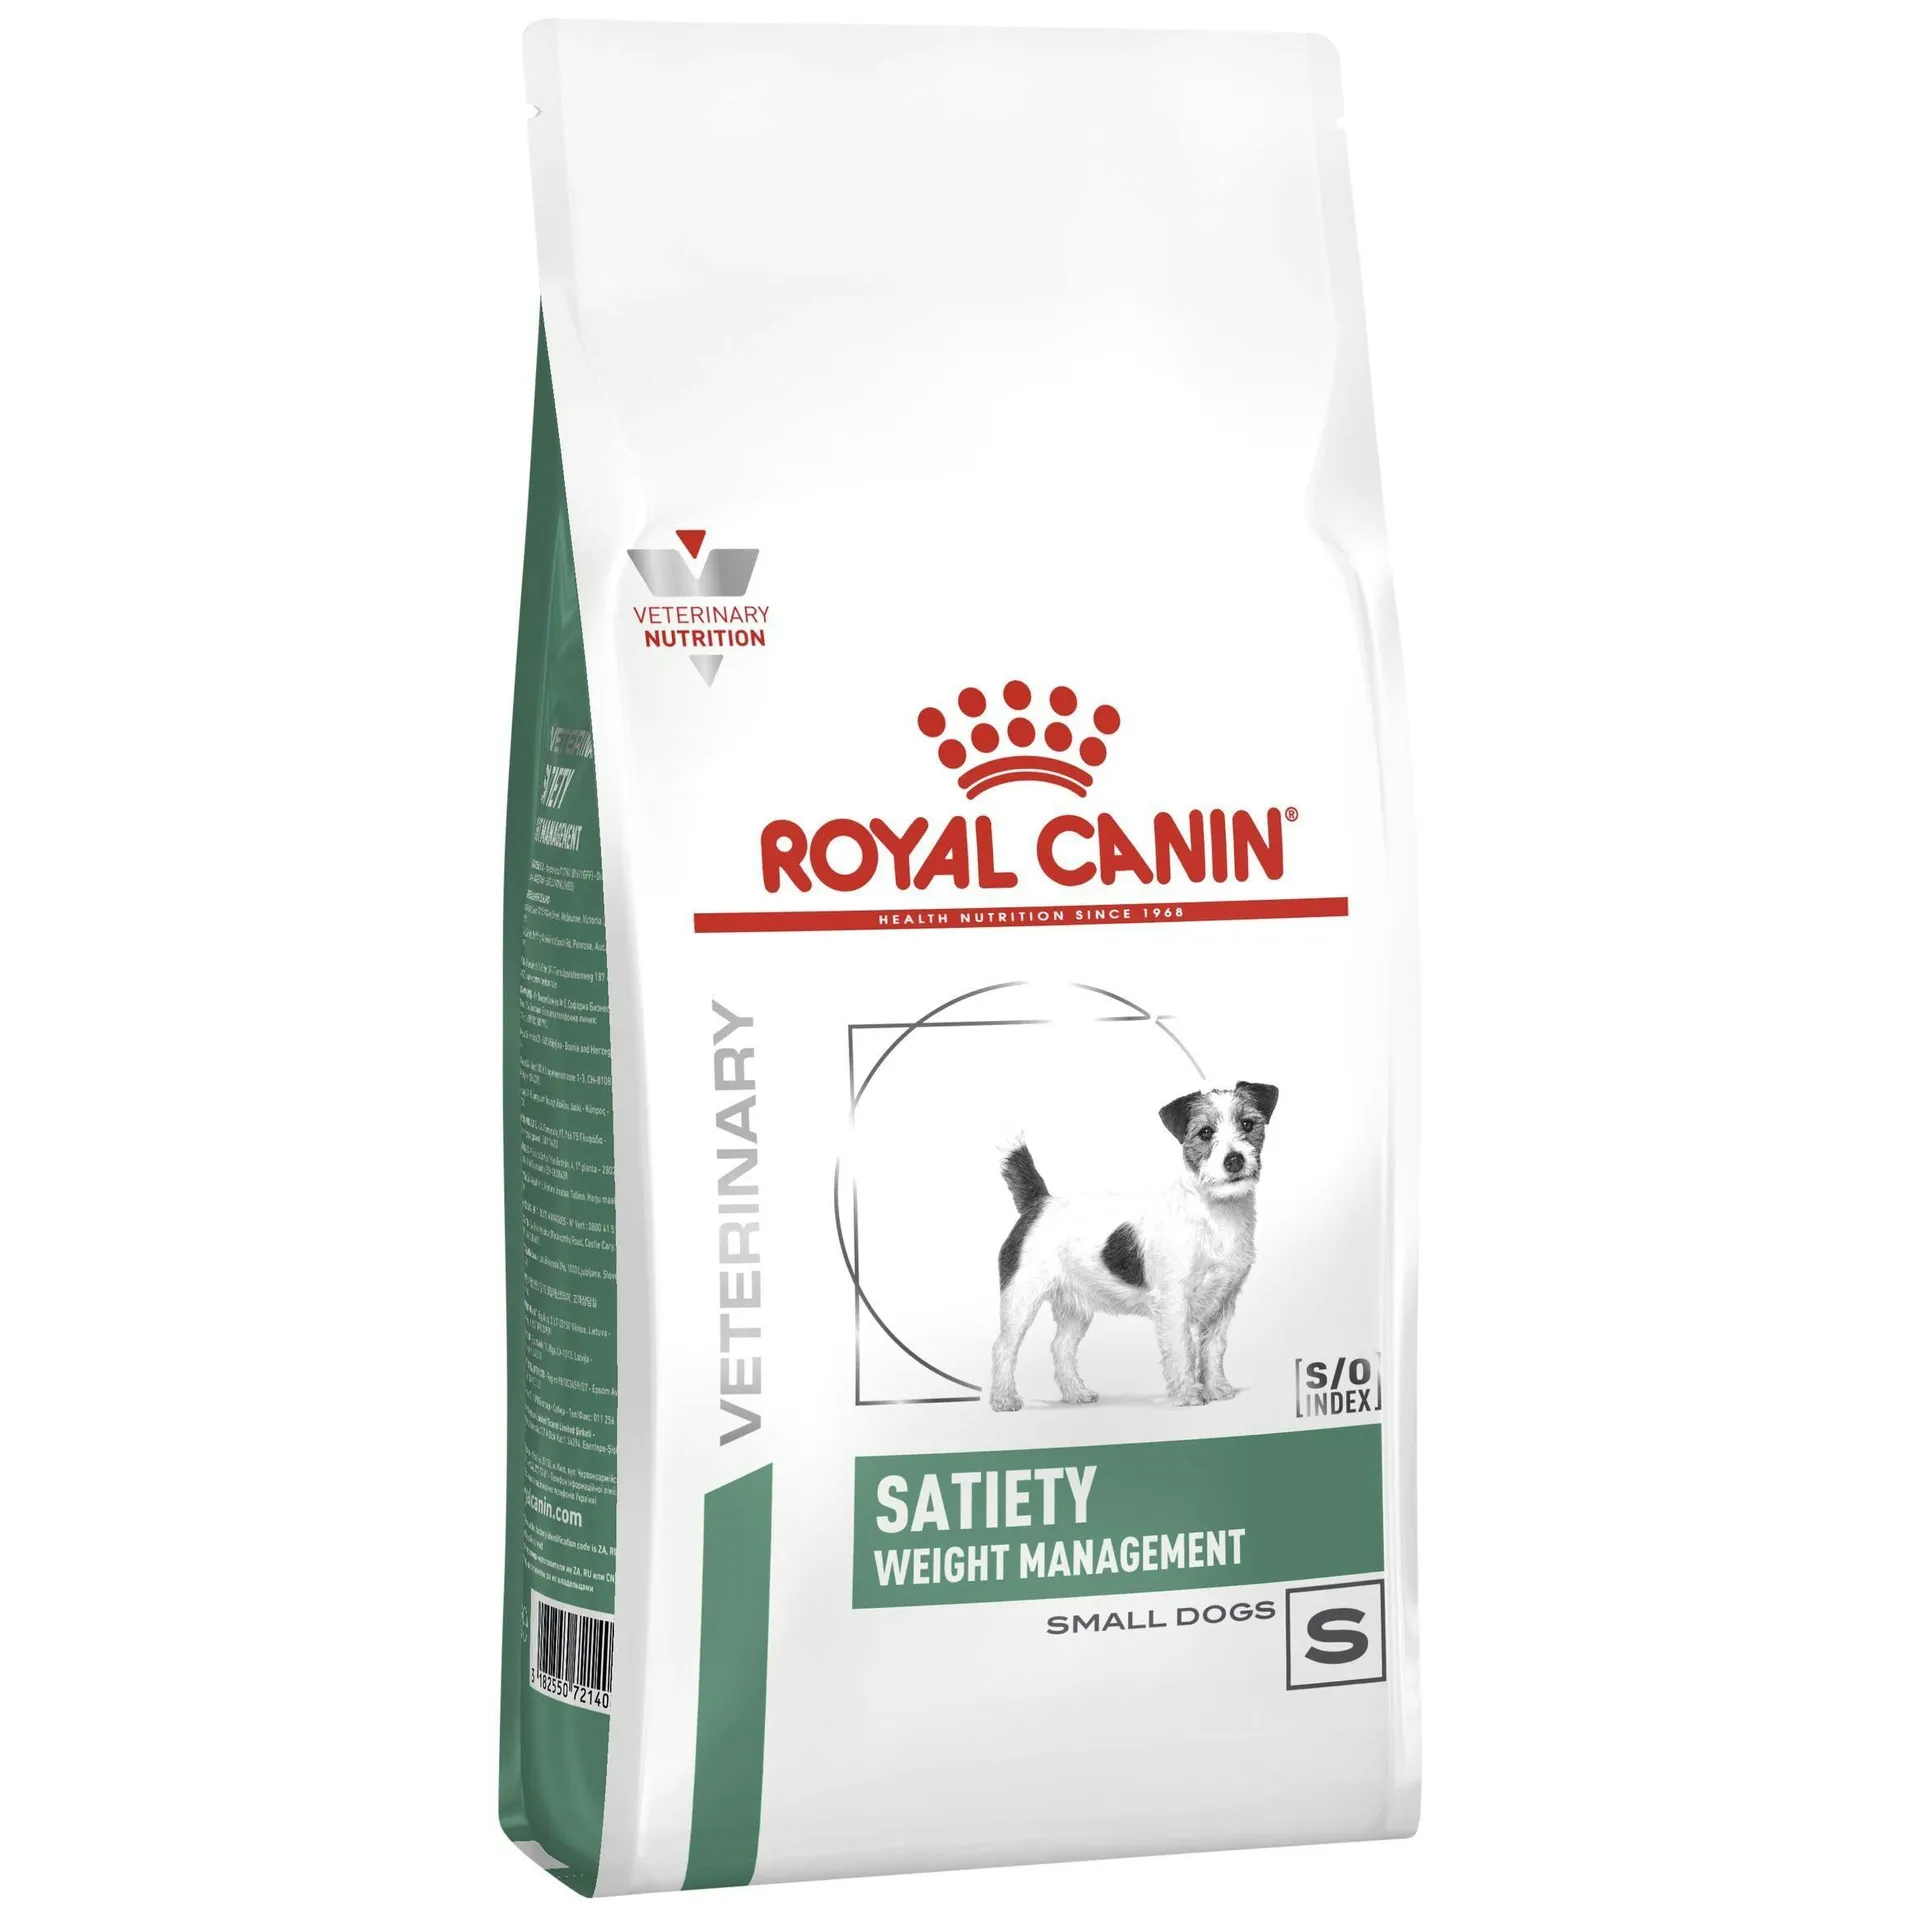 Royal Canin Veterinary Diet Satiety Weight Management Small Dog Dry Dog Food